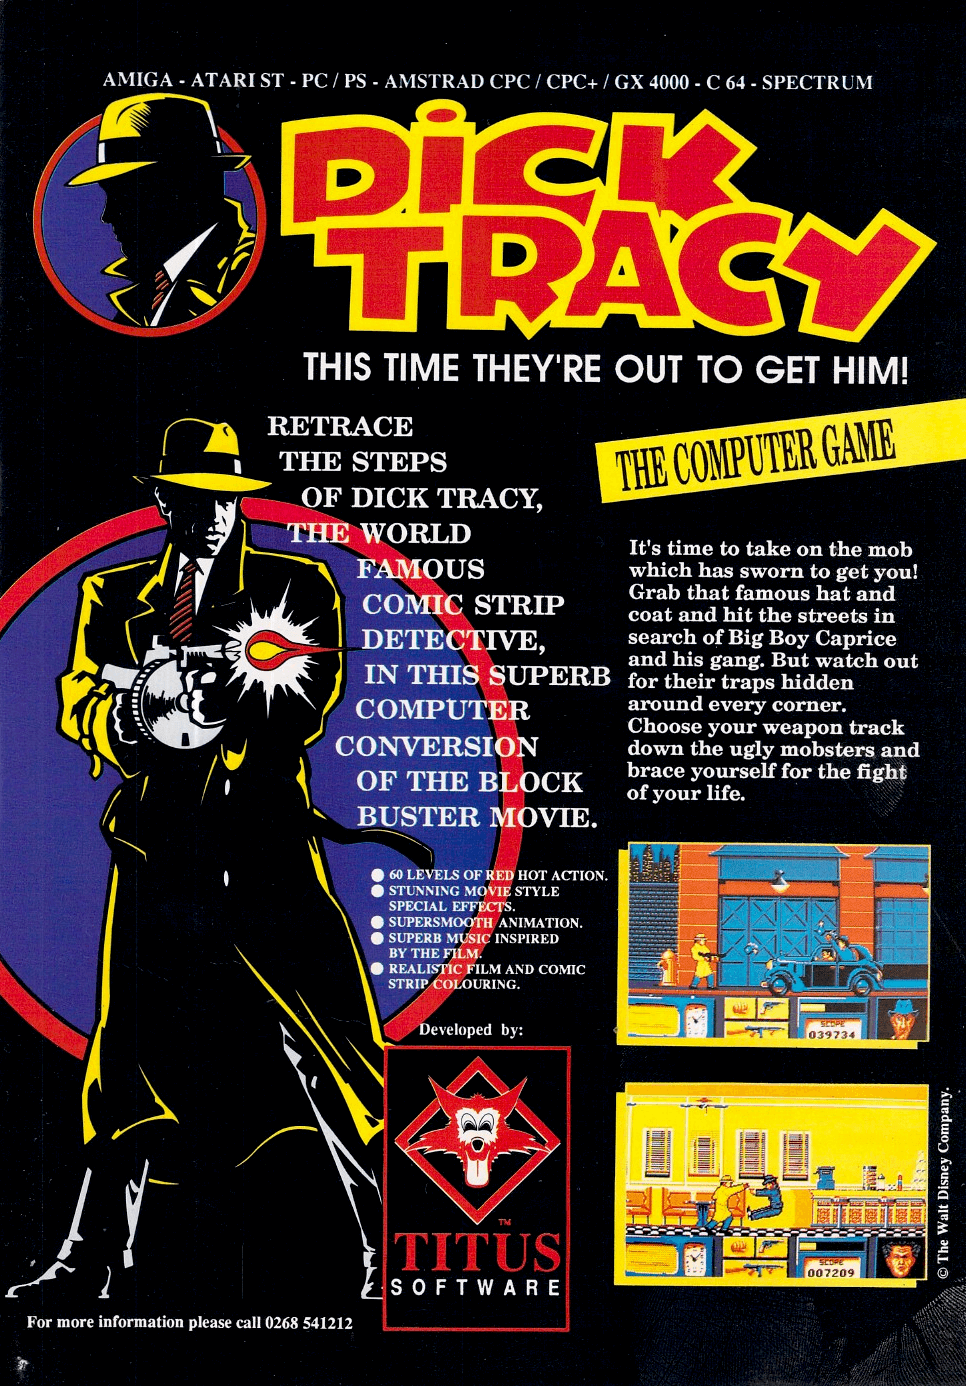 Image For Post | Description
Dick Tracy is a tie in to the 1990 movie adaptation of the classic comic strip, staring Warren Beatty and Madonna. While an action/adventure hybrid using this license was released by Disney for the PC and Amiga, Titus also held a license to the movie. 

This is a side scrolling action game, where you control Dick Tracy as he moves through five stages, shooting gangsters with an assortment of weapons. Each stage leads to one of the mob bosses, until you ultimately capture the big man himself.


Development history
Disney were originally behind the C64 and DOS versions, plus an unreleased one for the Apple. However, they pulled the plug on all versions when it became clear that they had badly misjudged the time it would take to get them out. No one was near done when the movie hit the silver screen. 

Also the movie wasn’t doing that well and the related merchandise wasn’t selling. Despite this, Titus decided to press on and release the game in Europe.

While the Amiga/ST and Spectrum/Amstrad versions were coded from scratch, the C64 and PC versions were released as they stood. This gives the C64 version especially a very unfinished feel - there are no end-of-level bosses, killed enemies disappear rather than being shown to die, there are no gangsters lurking in windows to be shot at upwards, linking narrative headlines are missing, and so on. As such, the game is often considered one of the worst of its era. Other versions were equally poorly received.

[Crime solving adventure]
Another video game, Dick Tracy: The Crime Solving Adventure, for Amiga and MS-DOS, developed by Distinctive Software and also published by Walt Disney Computer Software.

Alternate Titles
    "ディックトレイシー" -- Japanese spelling